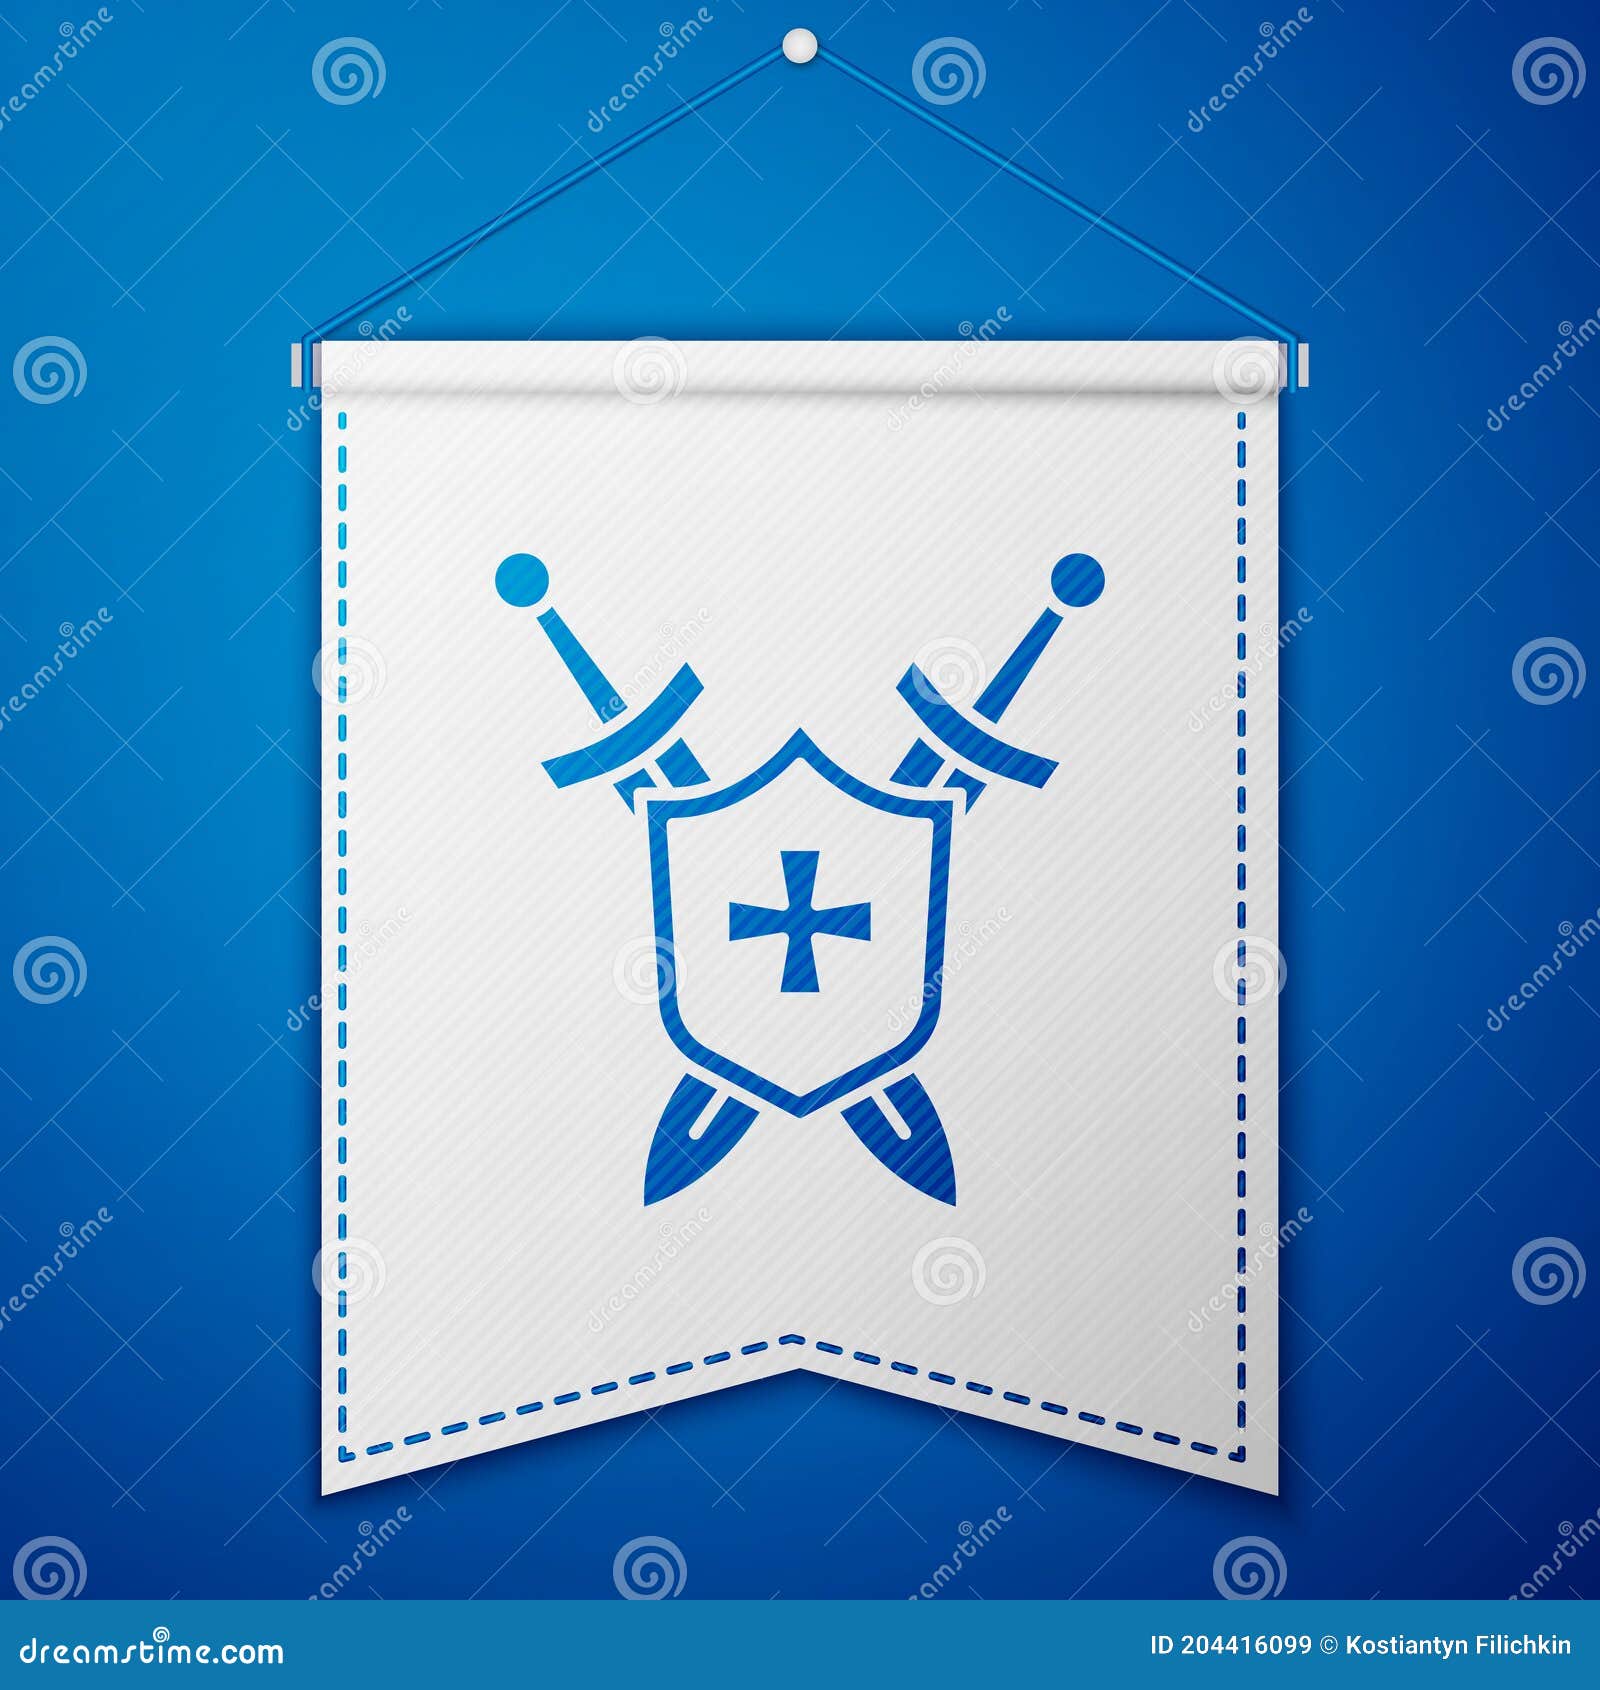 Paper Cut Medieval Wooden Shield With Crossed Swords Icon Isolated On Blue  Background Paper Art Style Vector Illustration Stock Illustration -  Download Image Now - iStock